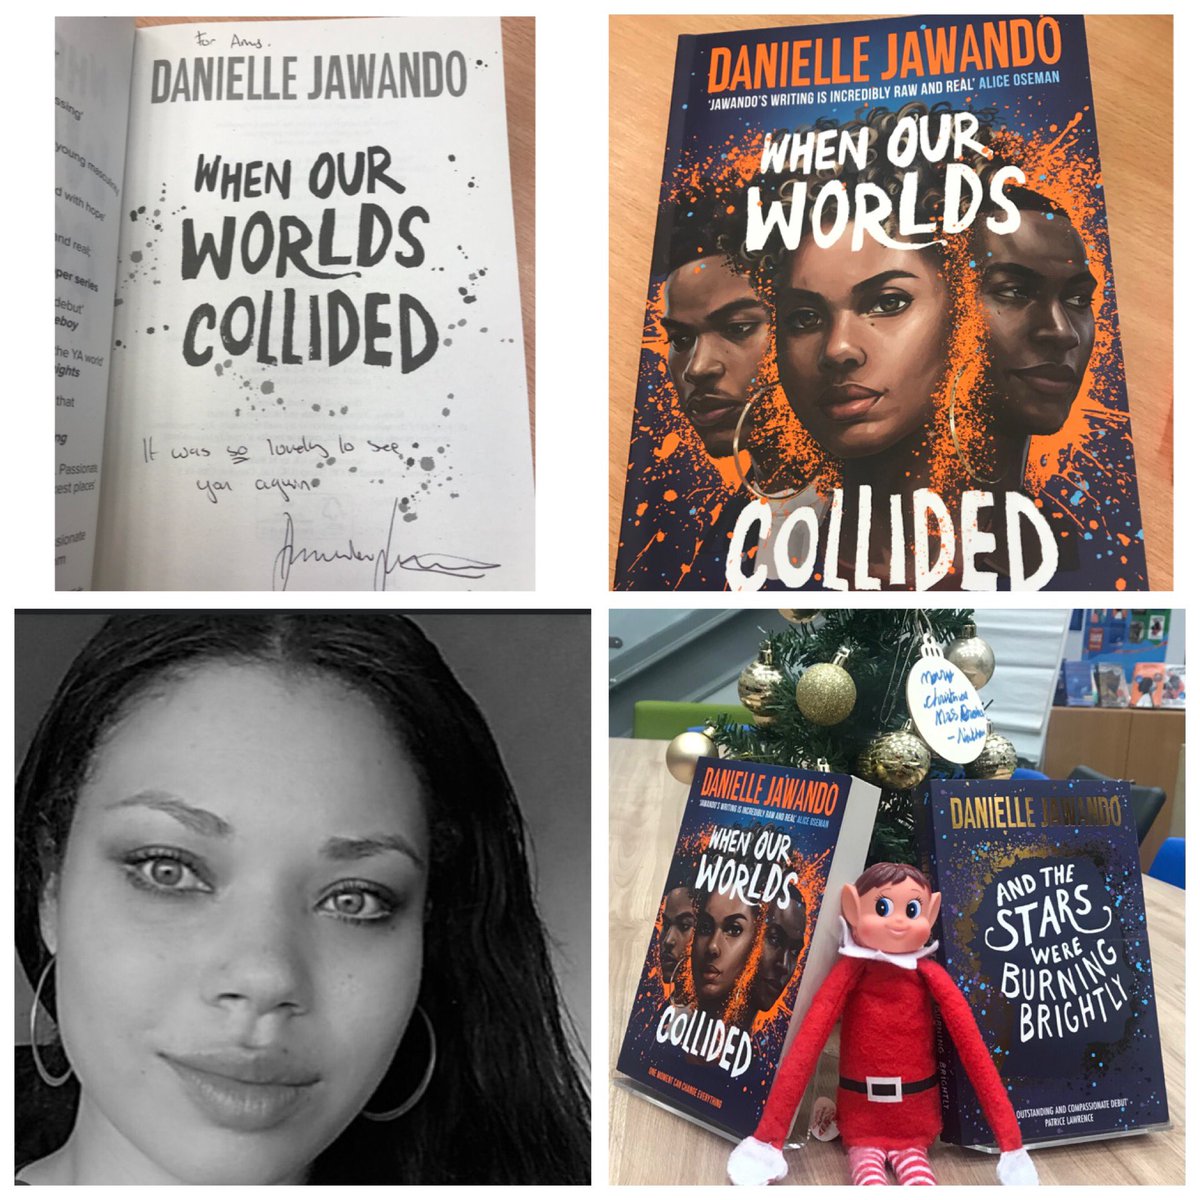 So grateful to the amazing Danielle Jawando for running a writing workshop in the library today. Our students now have loads of amazing ideas to help them with the Portico Sadie Massey Writing Awards🖊📚⭐️ @ThePortico #daniellejawando #sadiemasseyawards #authorvisit #writing